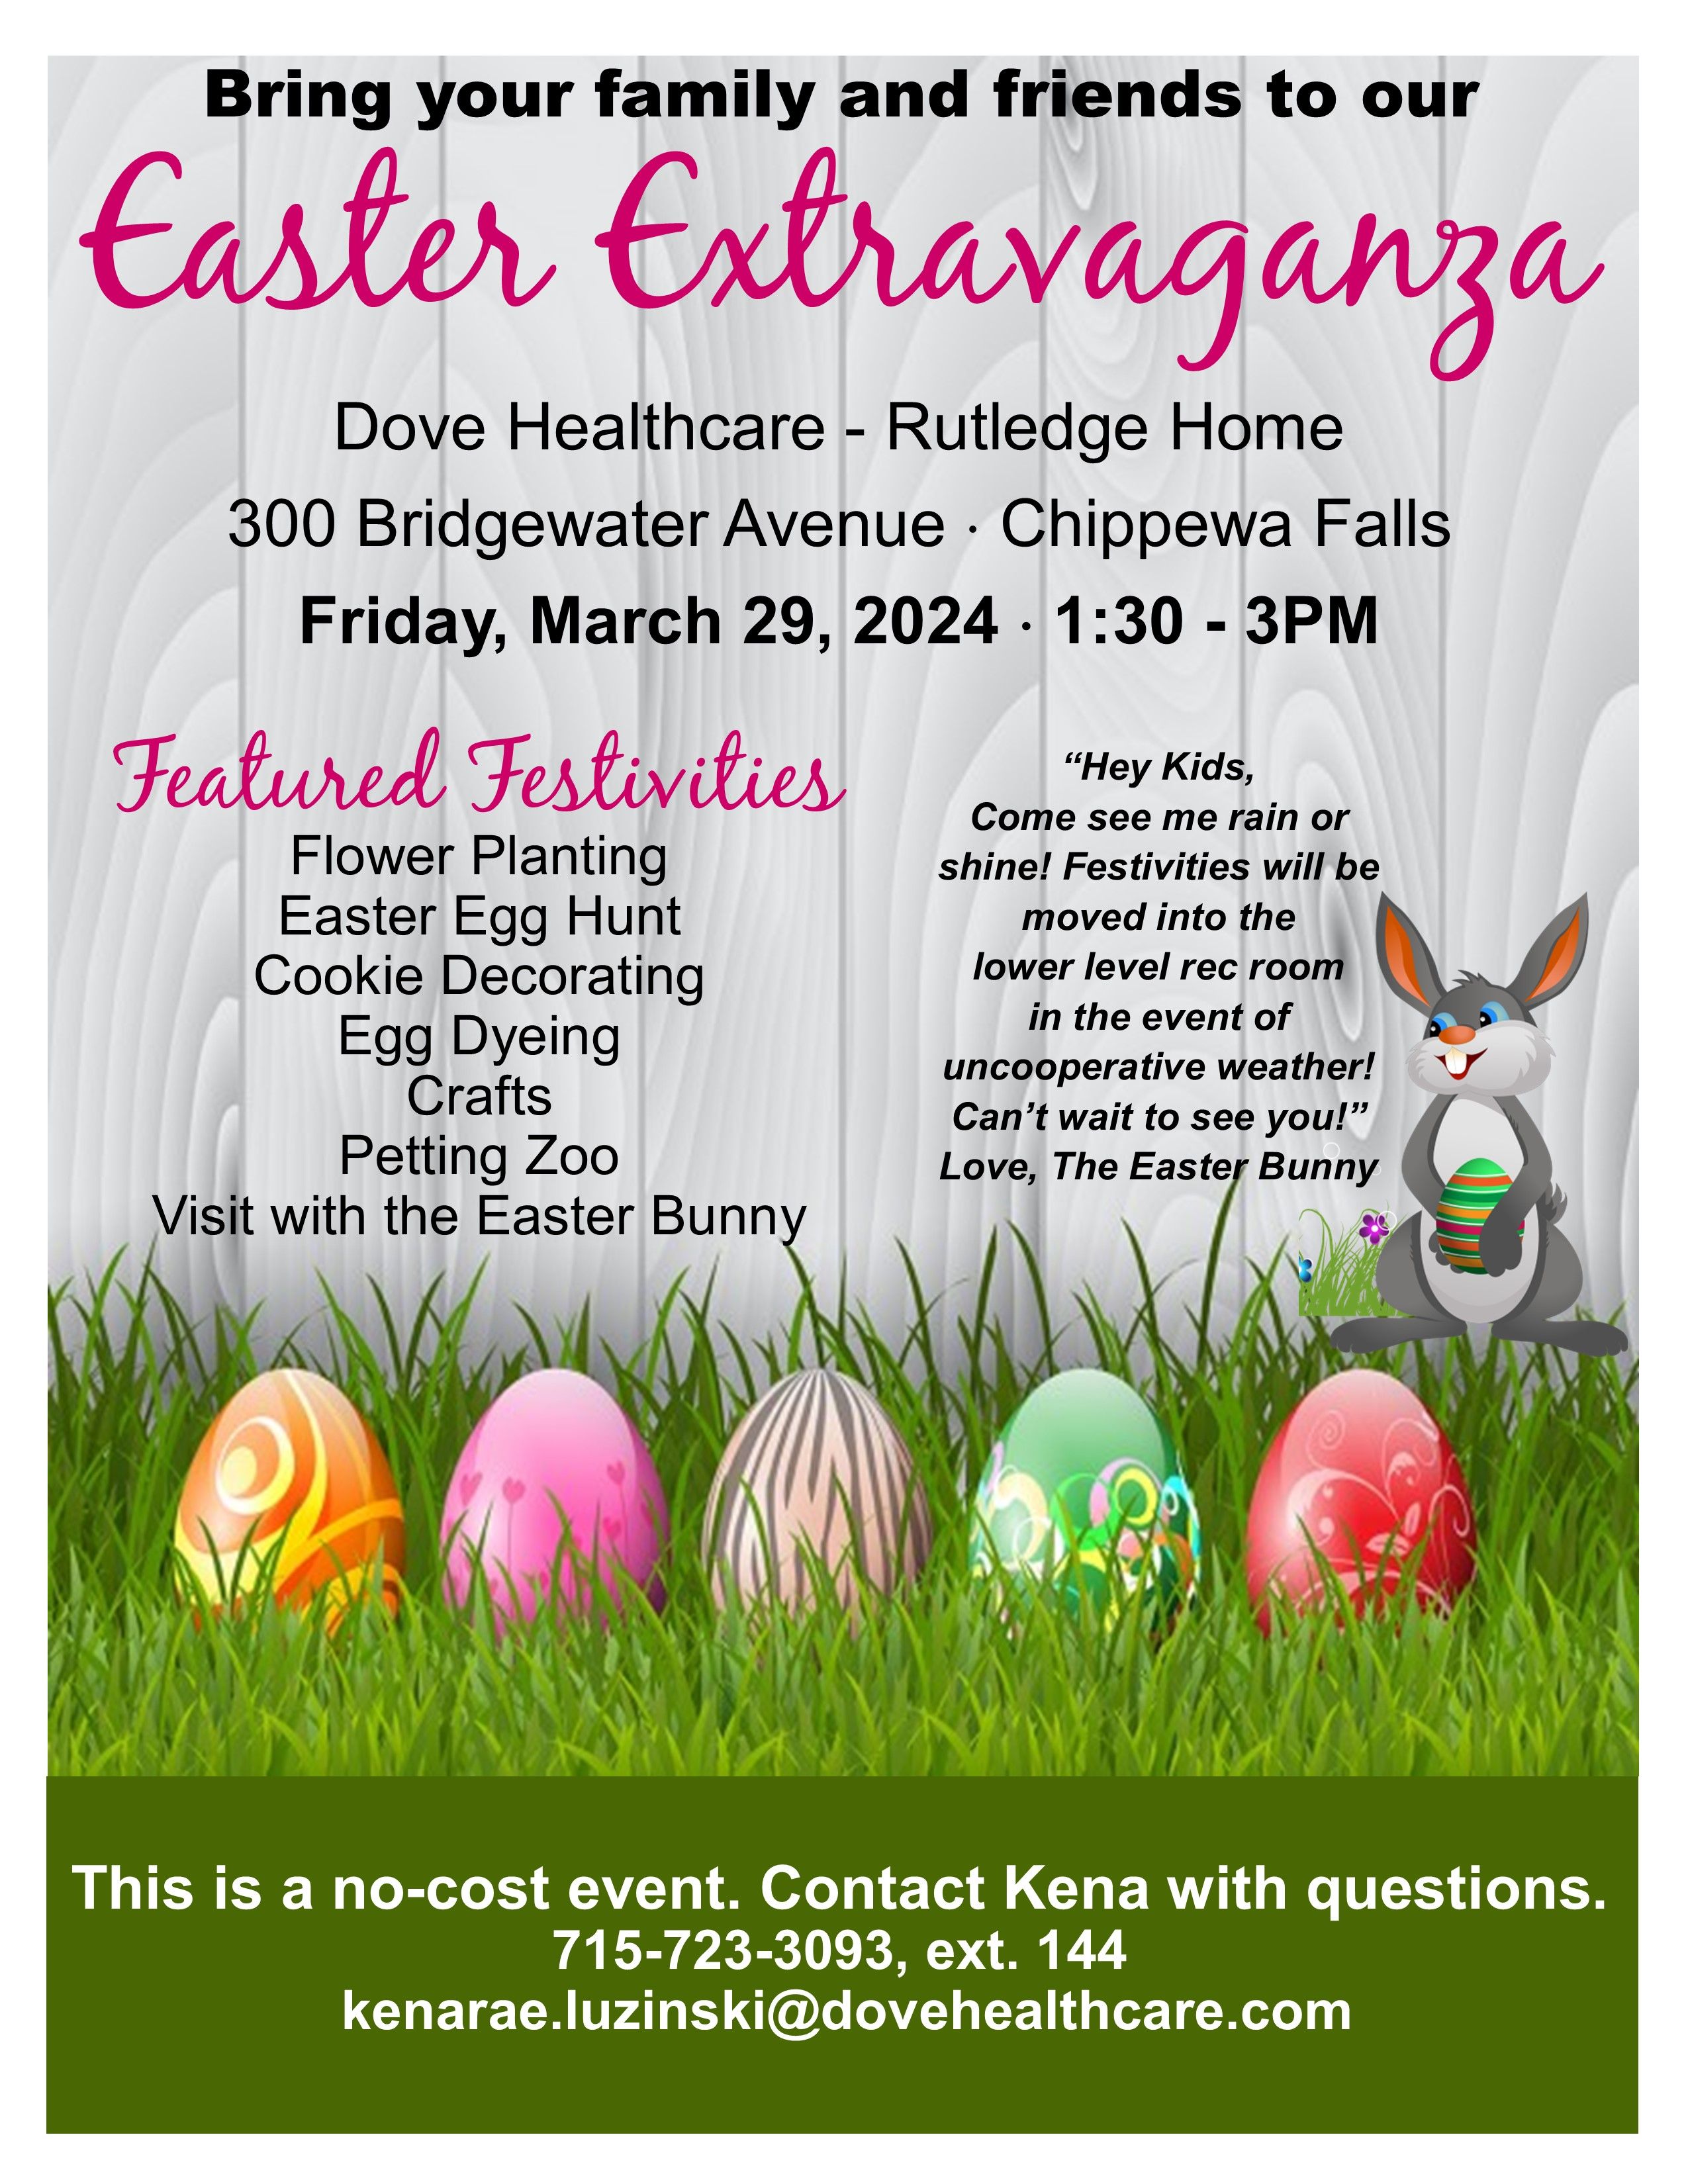 Easter Extravaganza in Chippewa Falls!